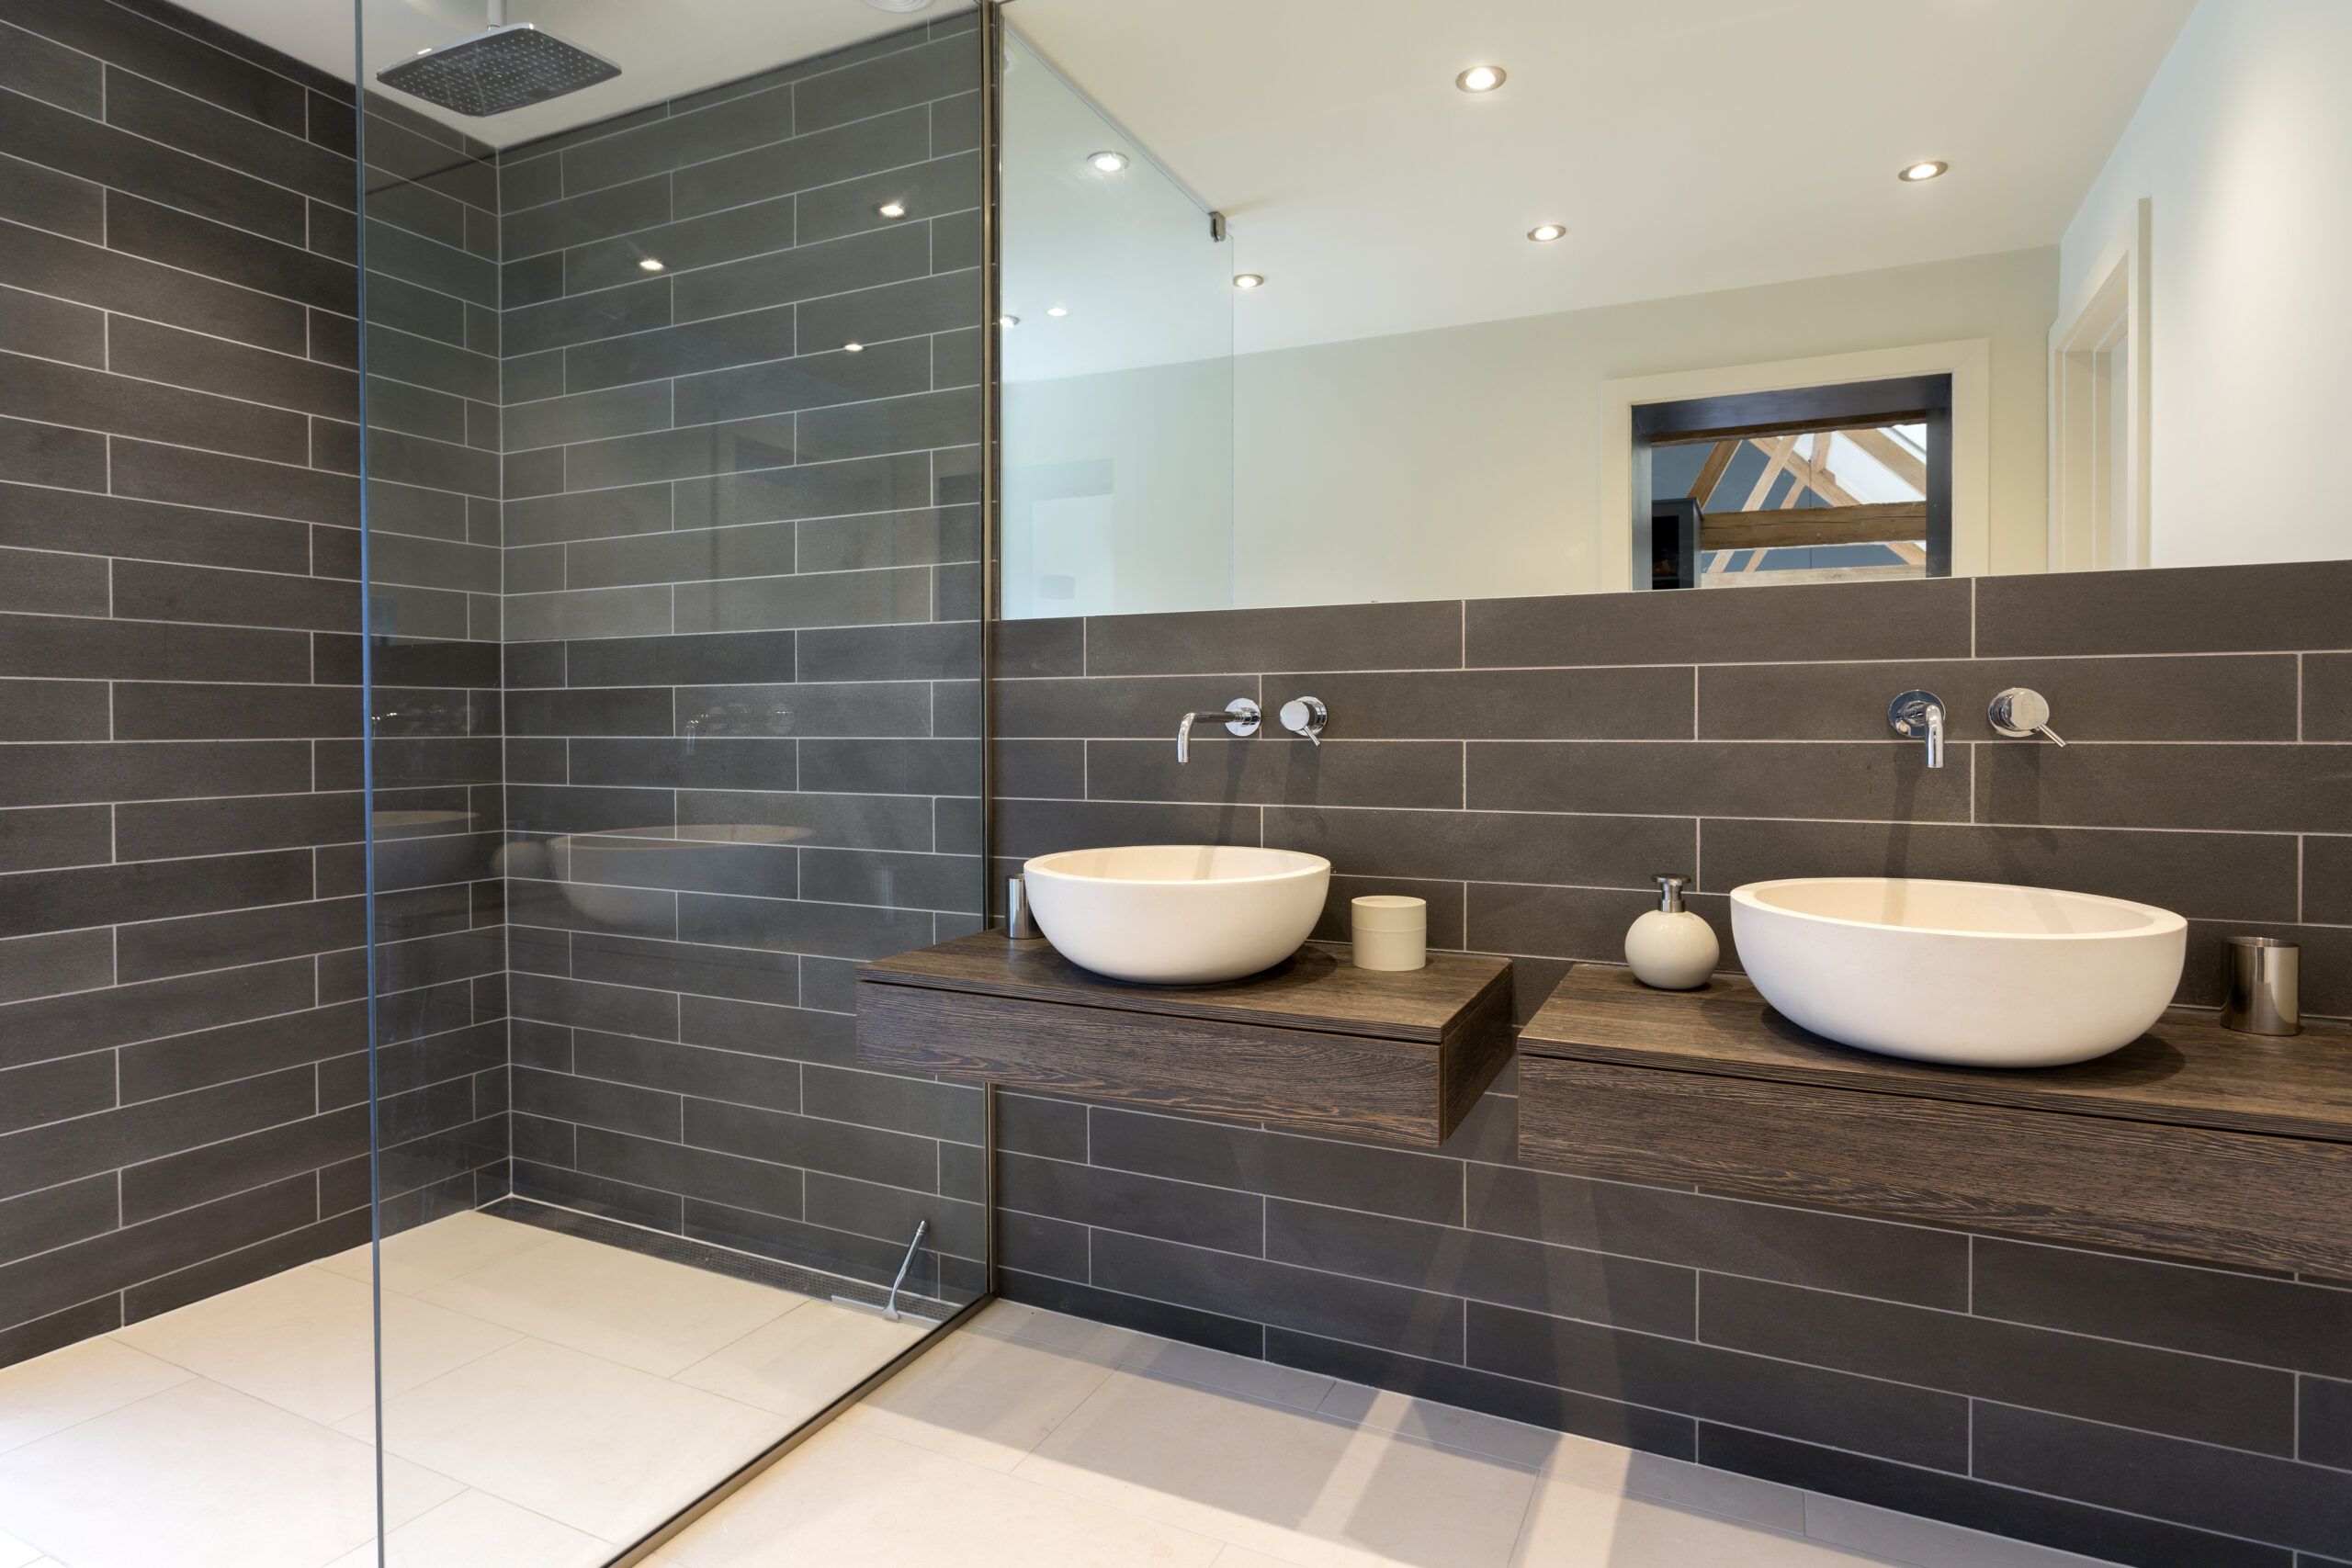 Oxford, Oxfordshire, uk, Sinks and shower in modern bathroom